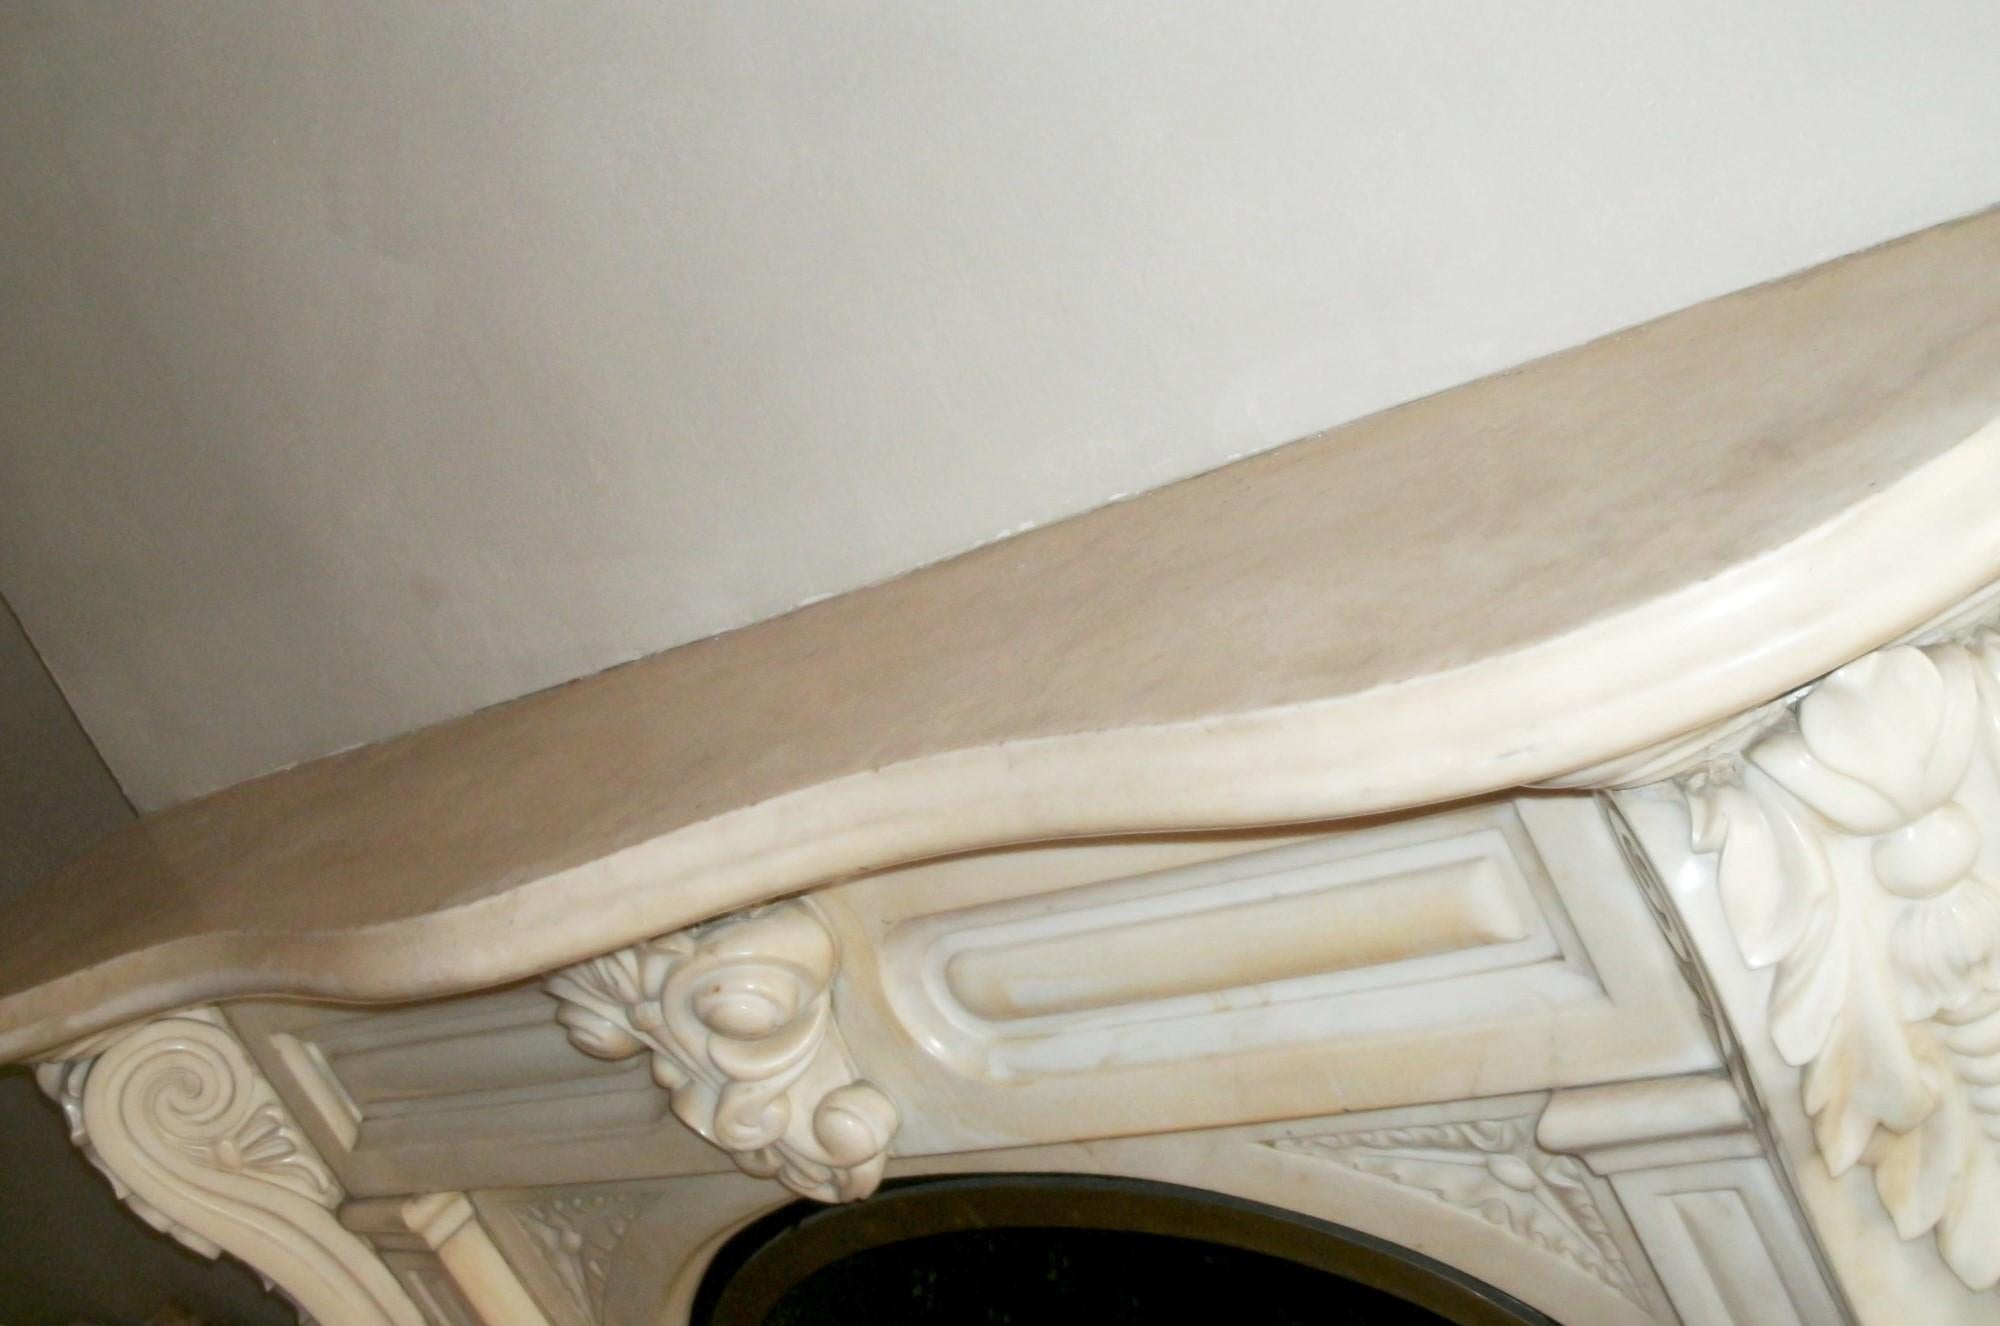 19th Century 1800s Victorian Carved Statuary White Marble Mantel Original to NYC Townhouse For Sale